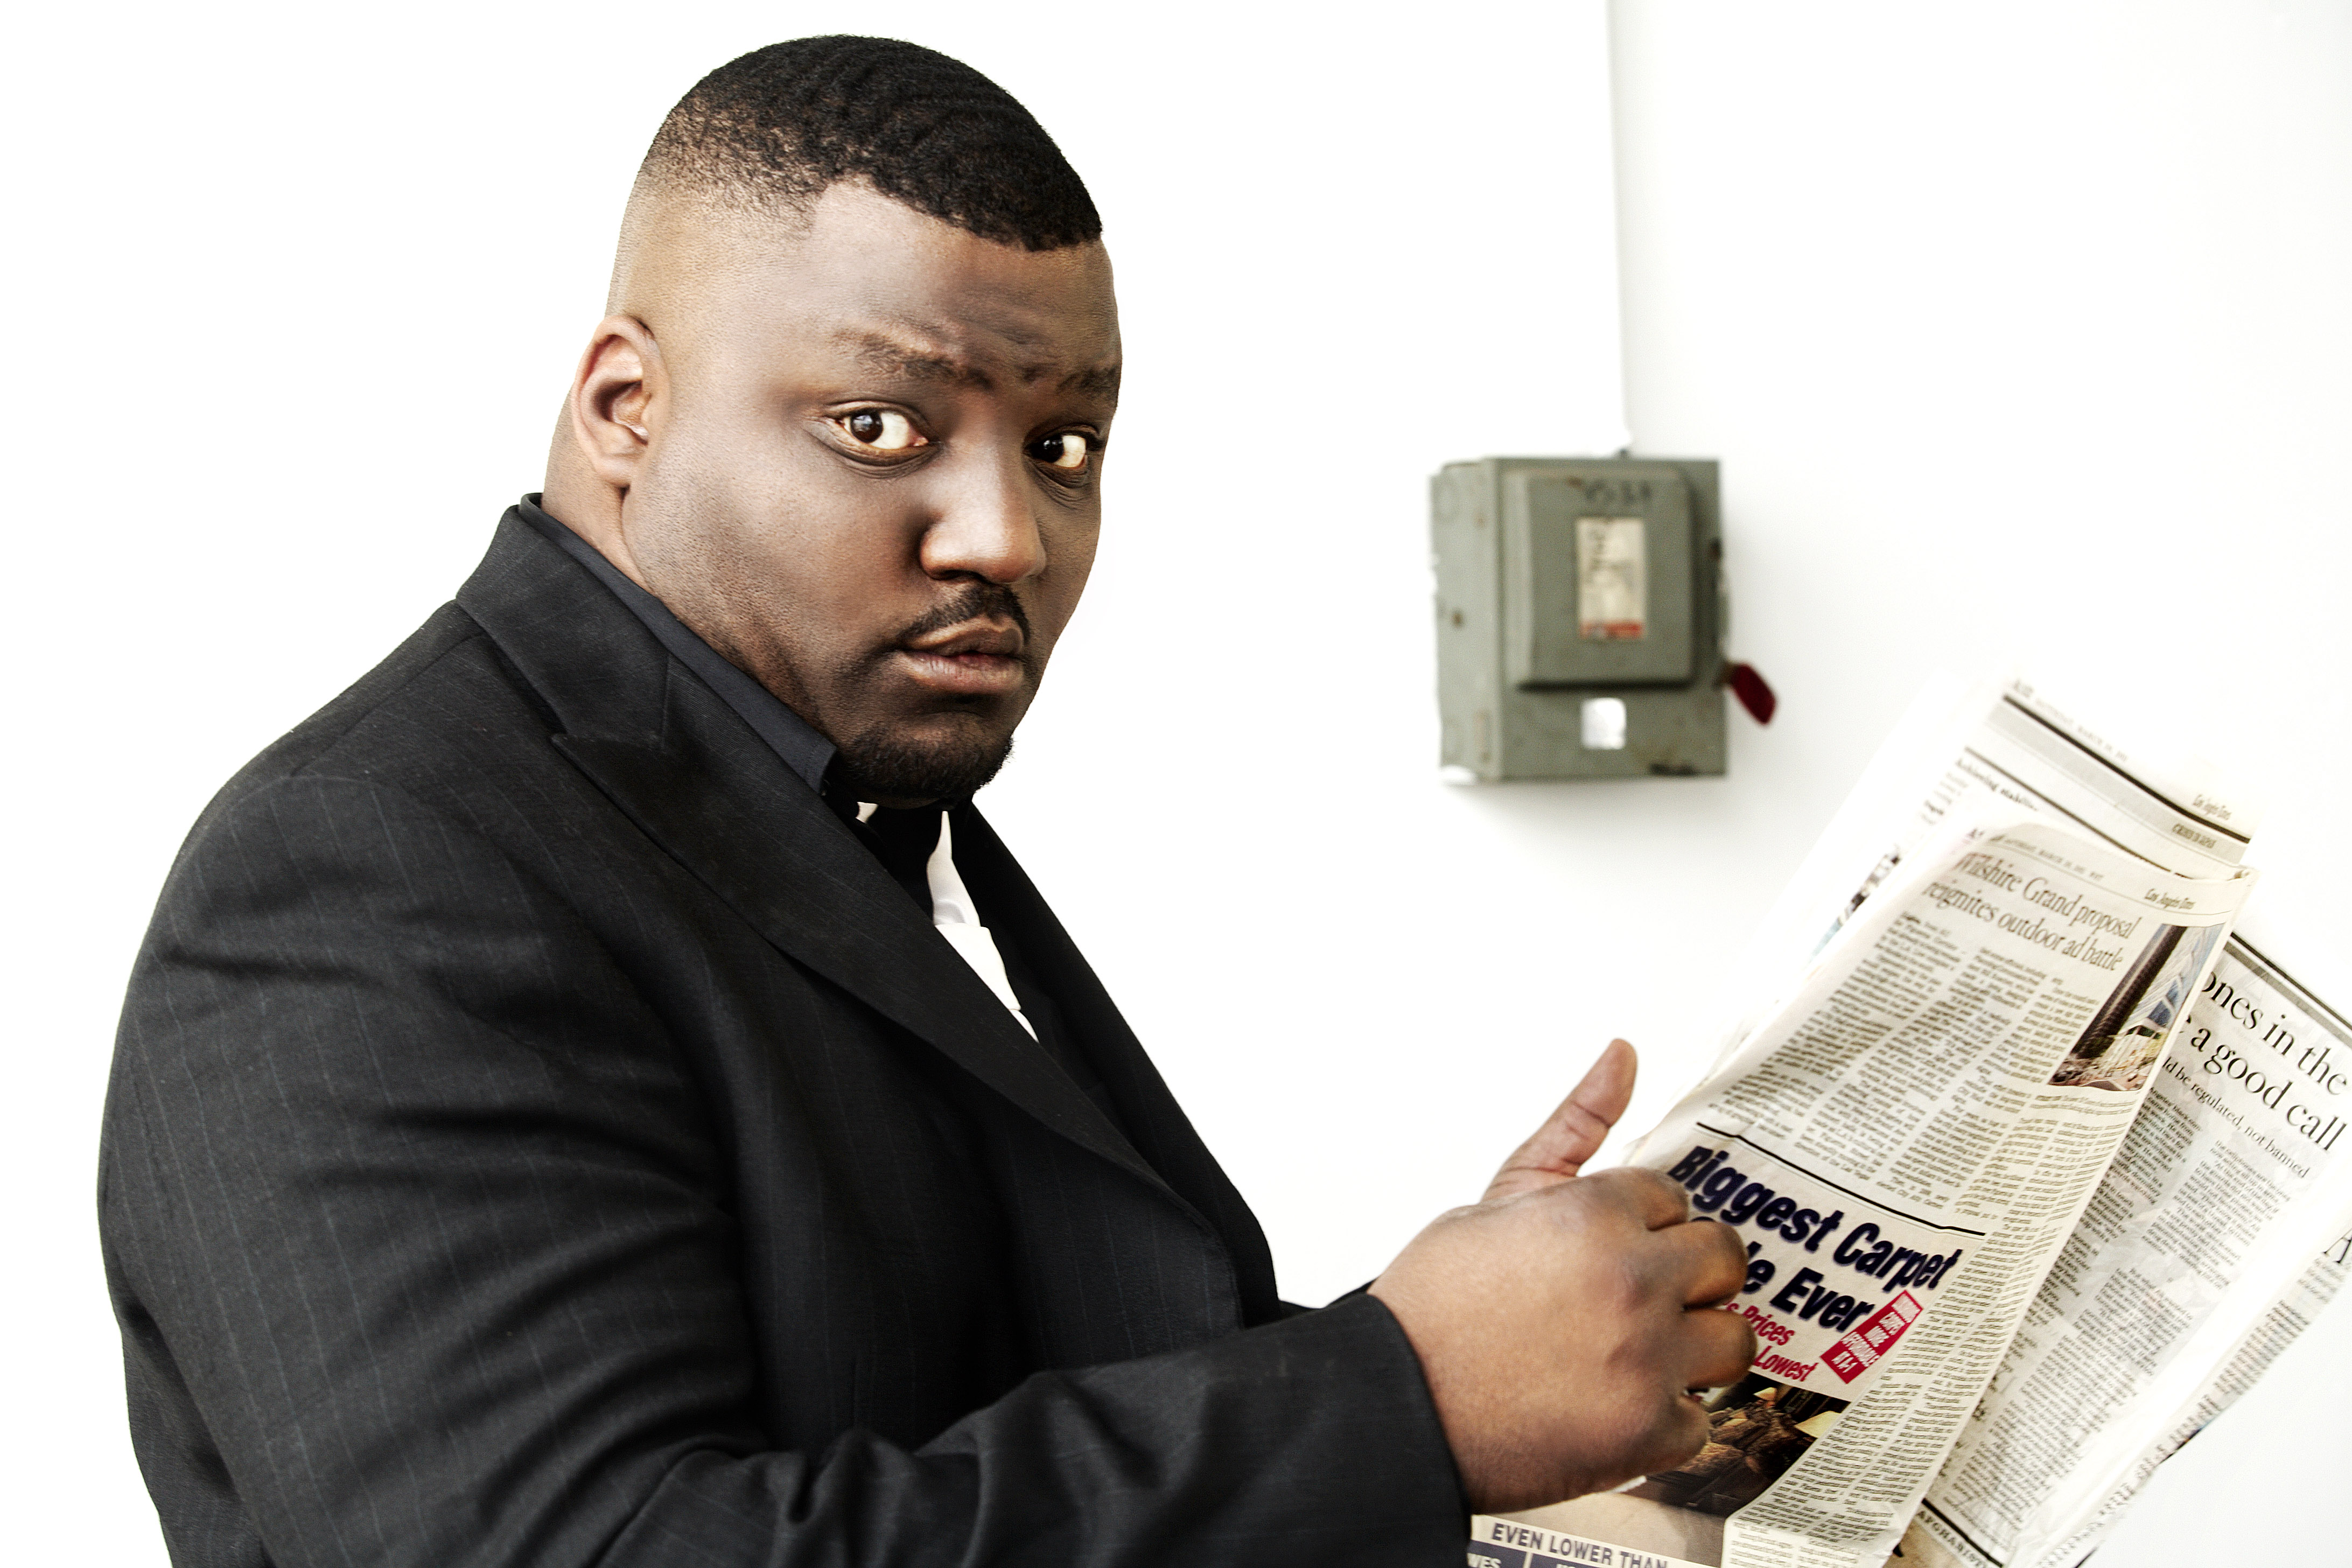 Aries Spears is a featured comic at the Hot 97 April Fools Comedy Show hosted by Tracy Morgan, April 1 at The Theater at Madison Square Garden.